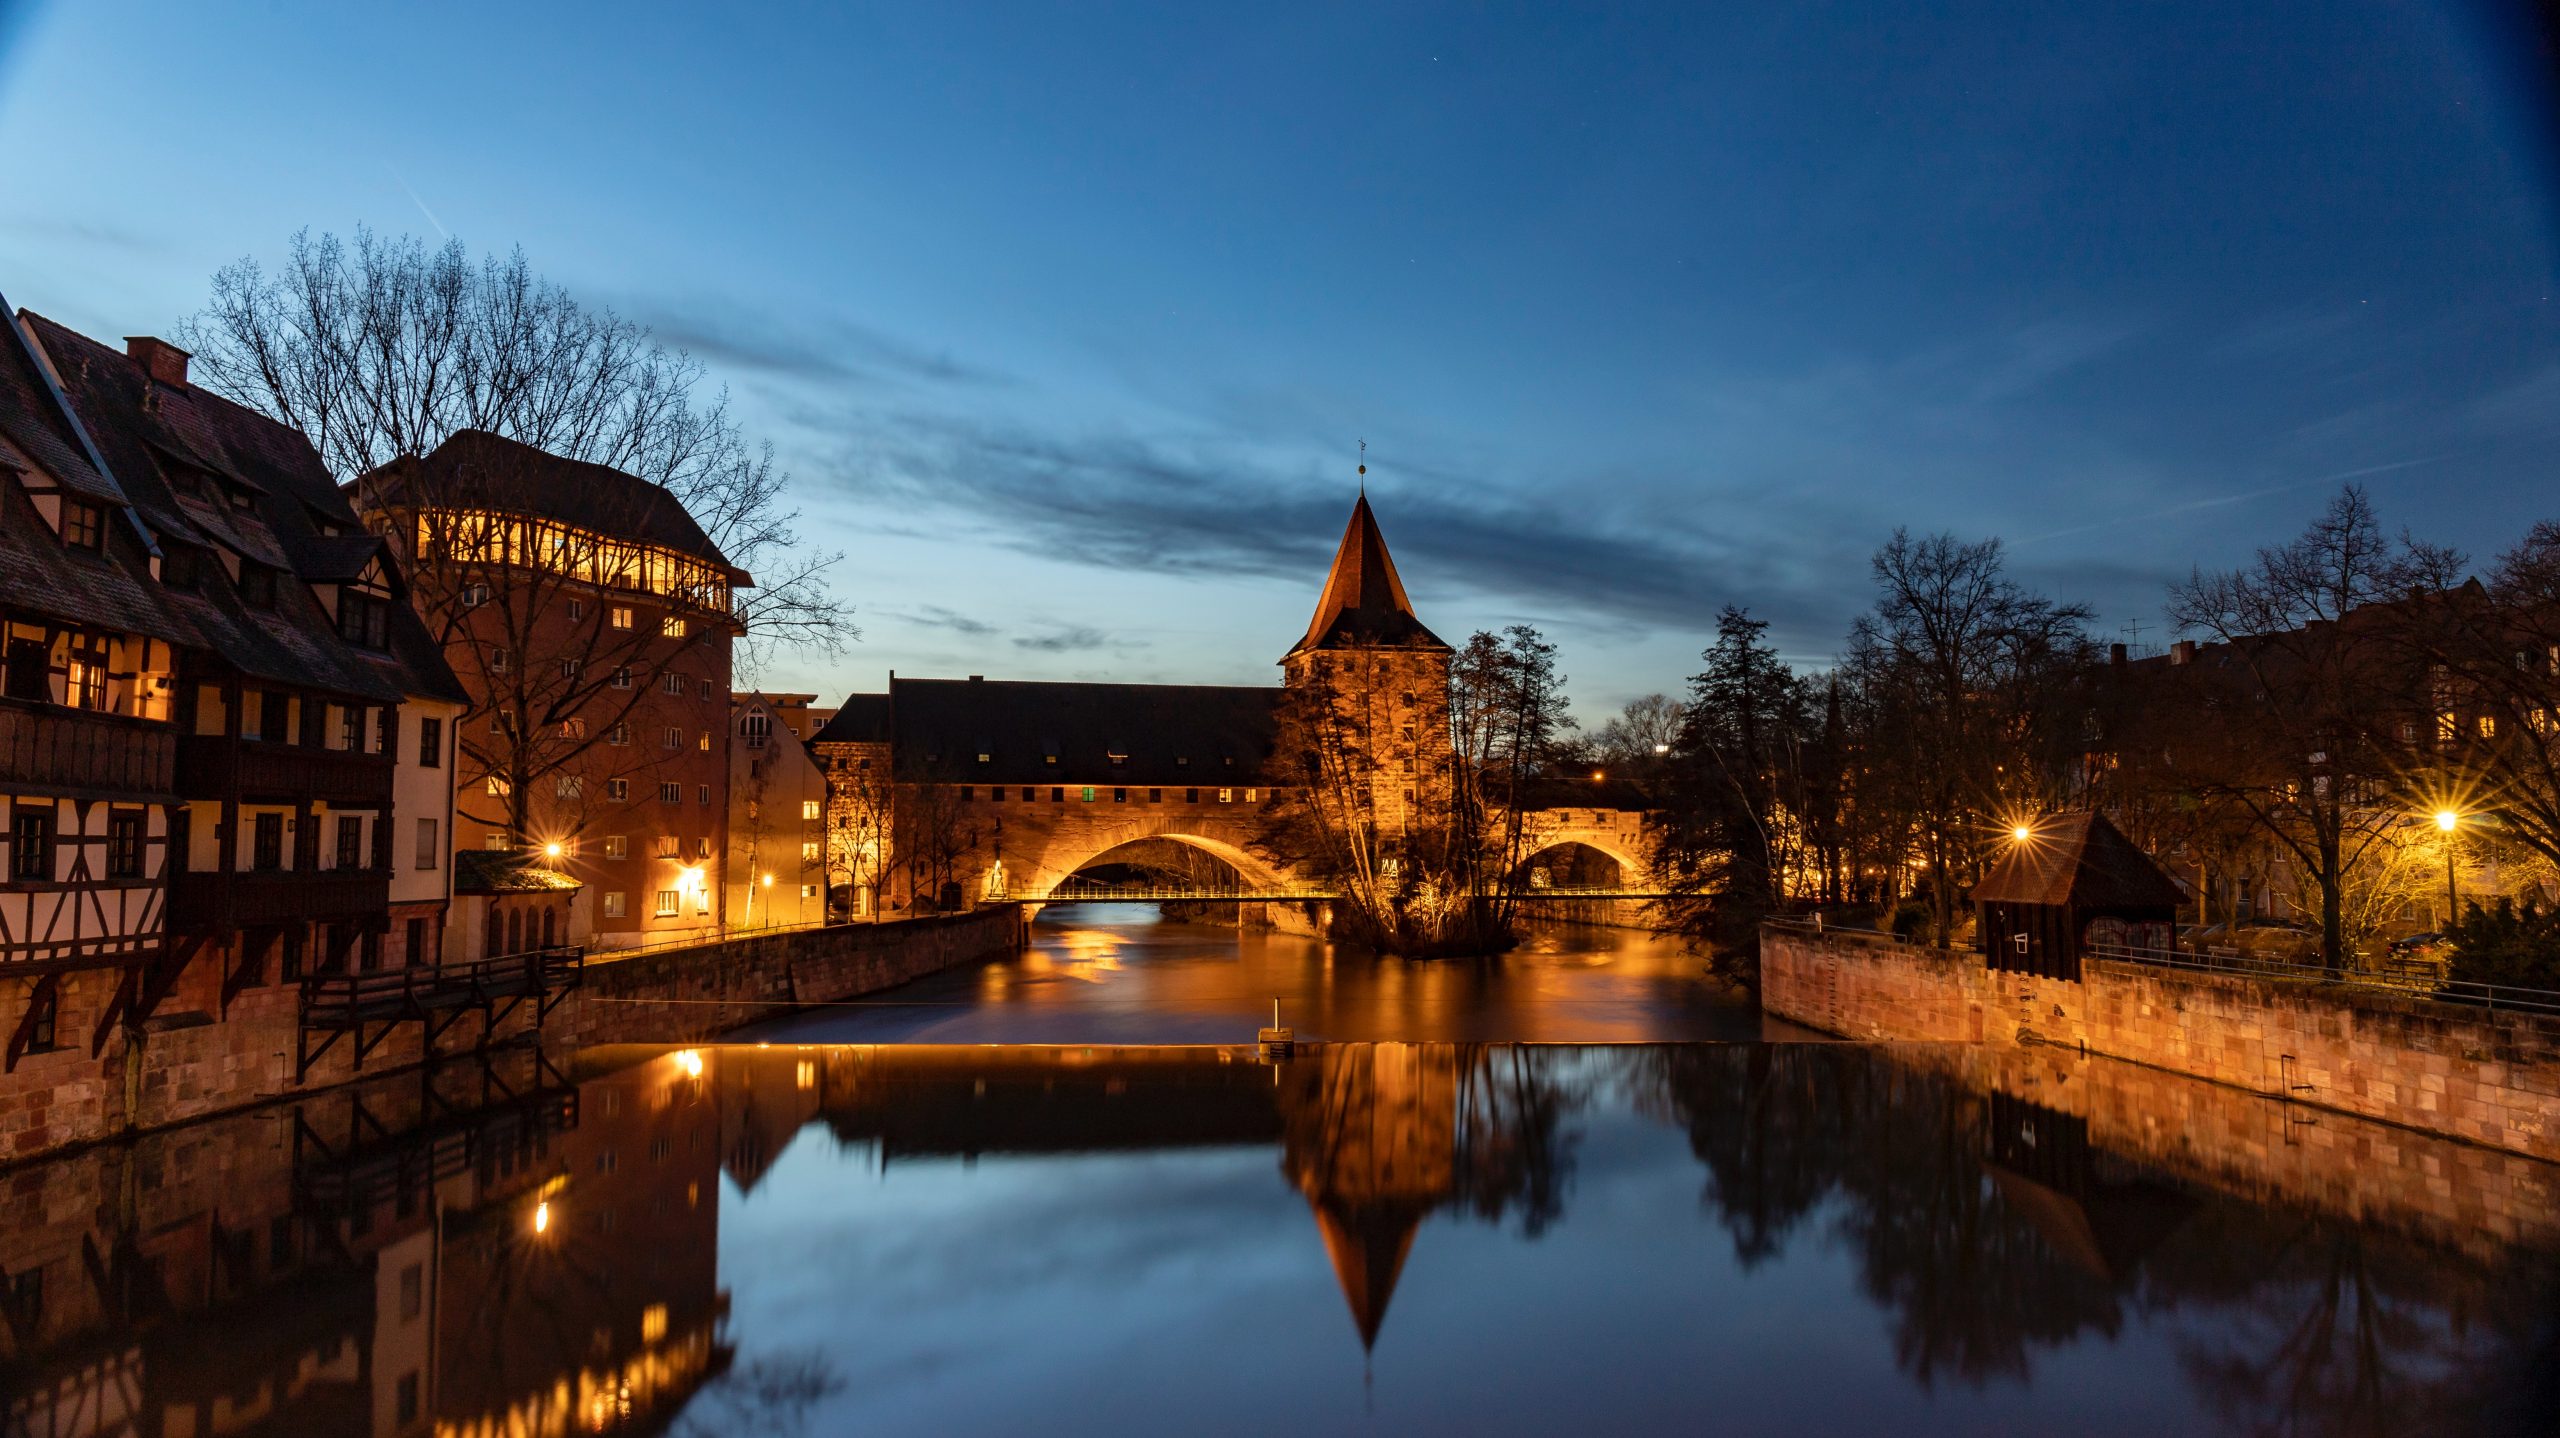 The old city of Nuremberg Germany at night